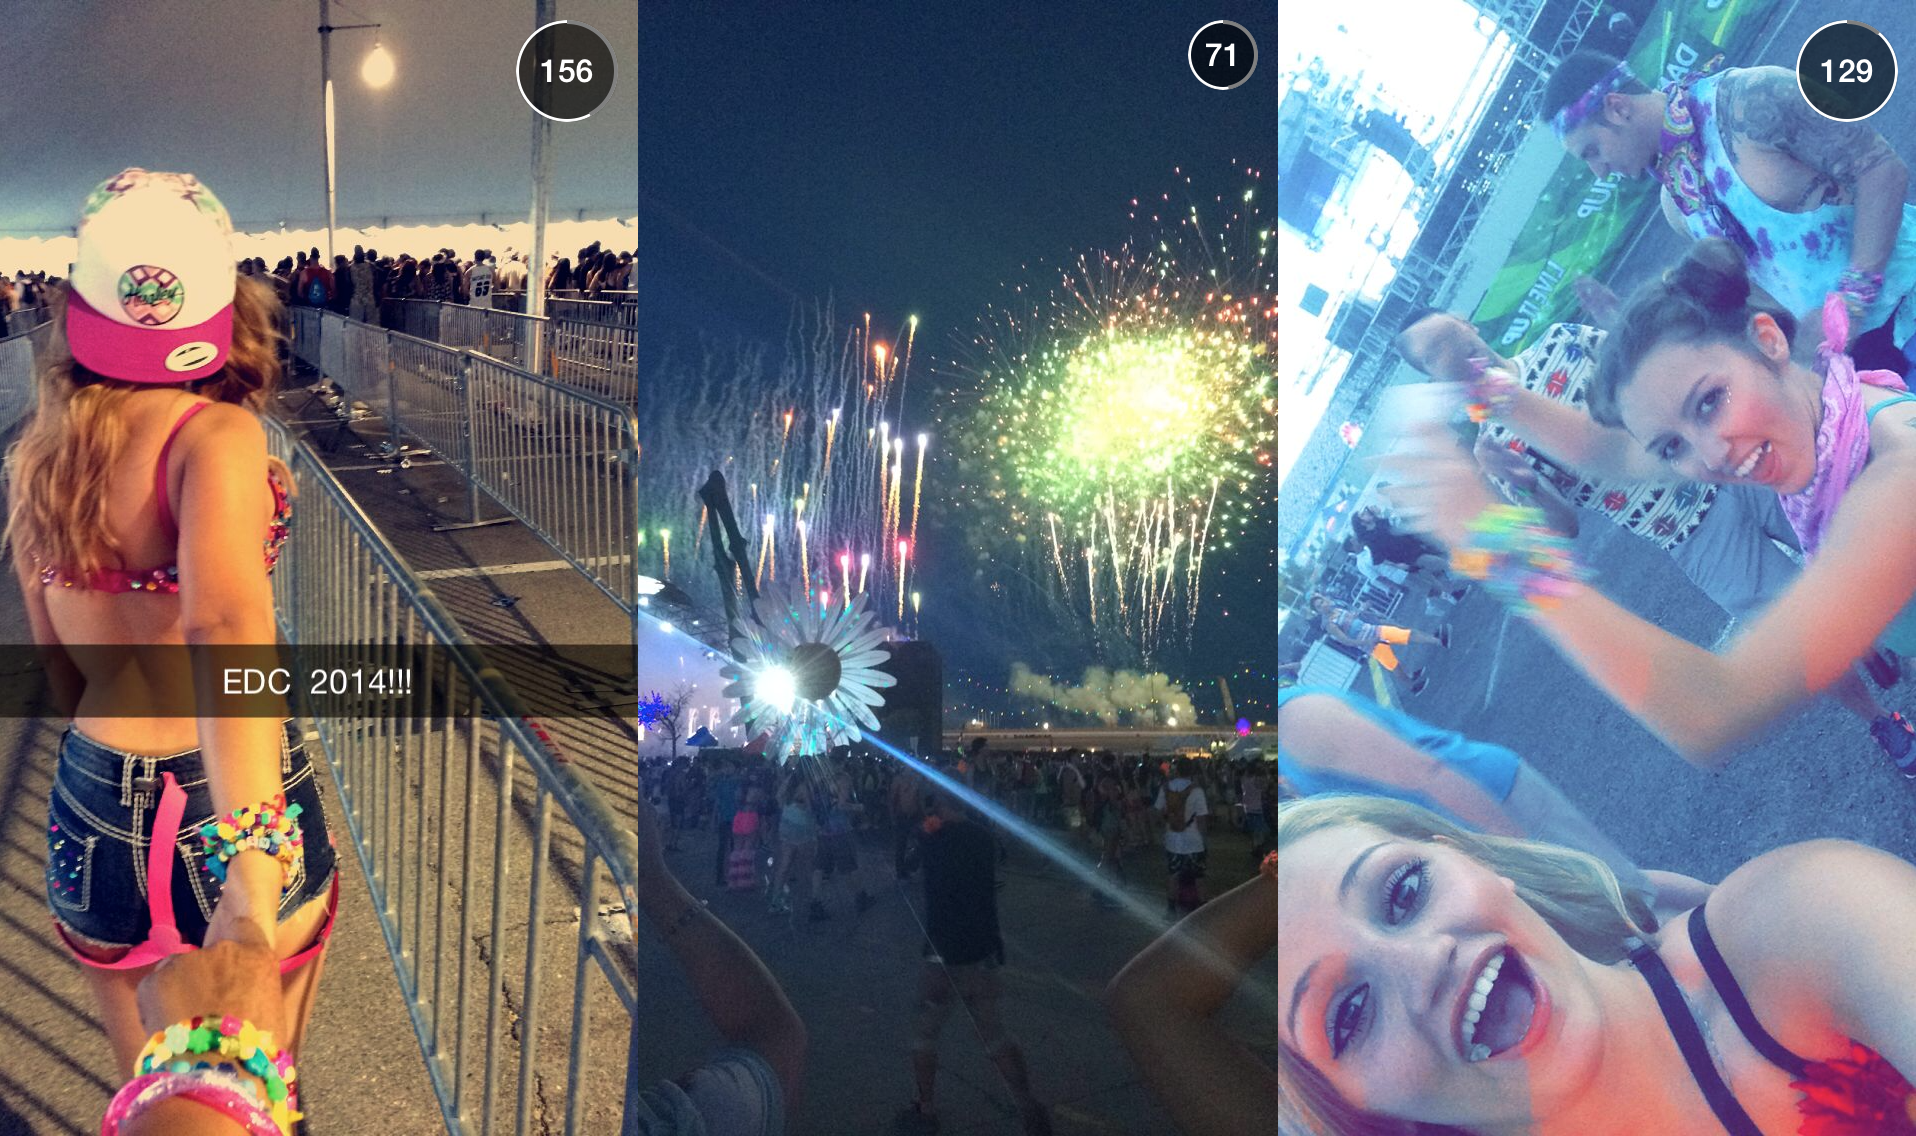 Snapchat enlists 20 partners to curate Our Stories from submissions.